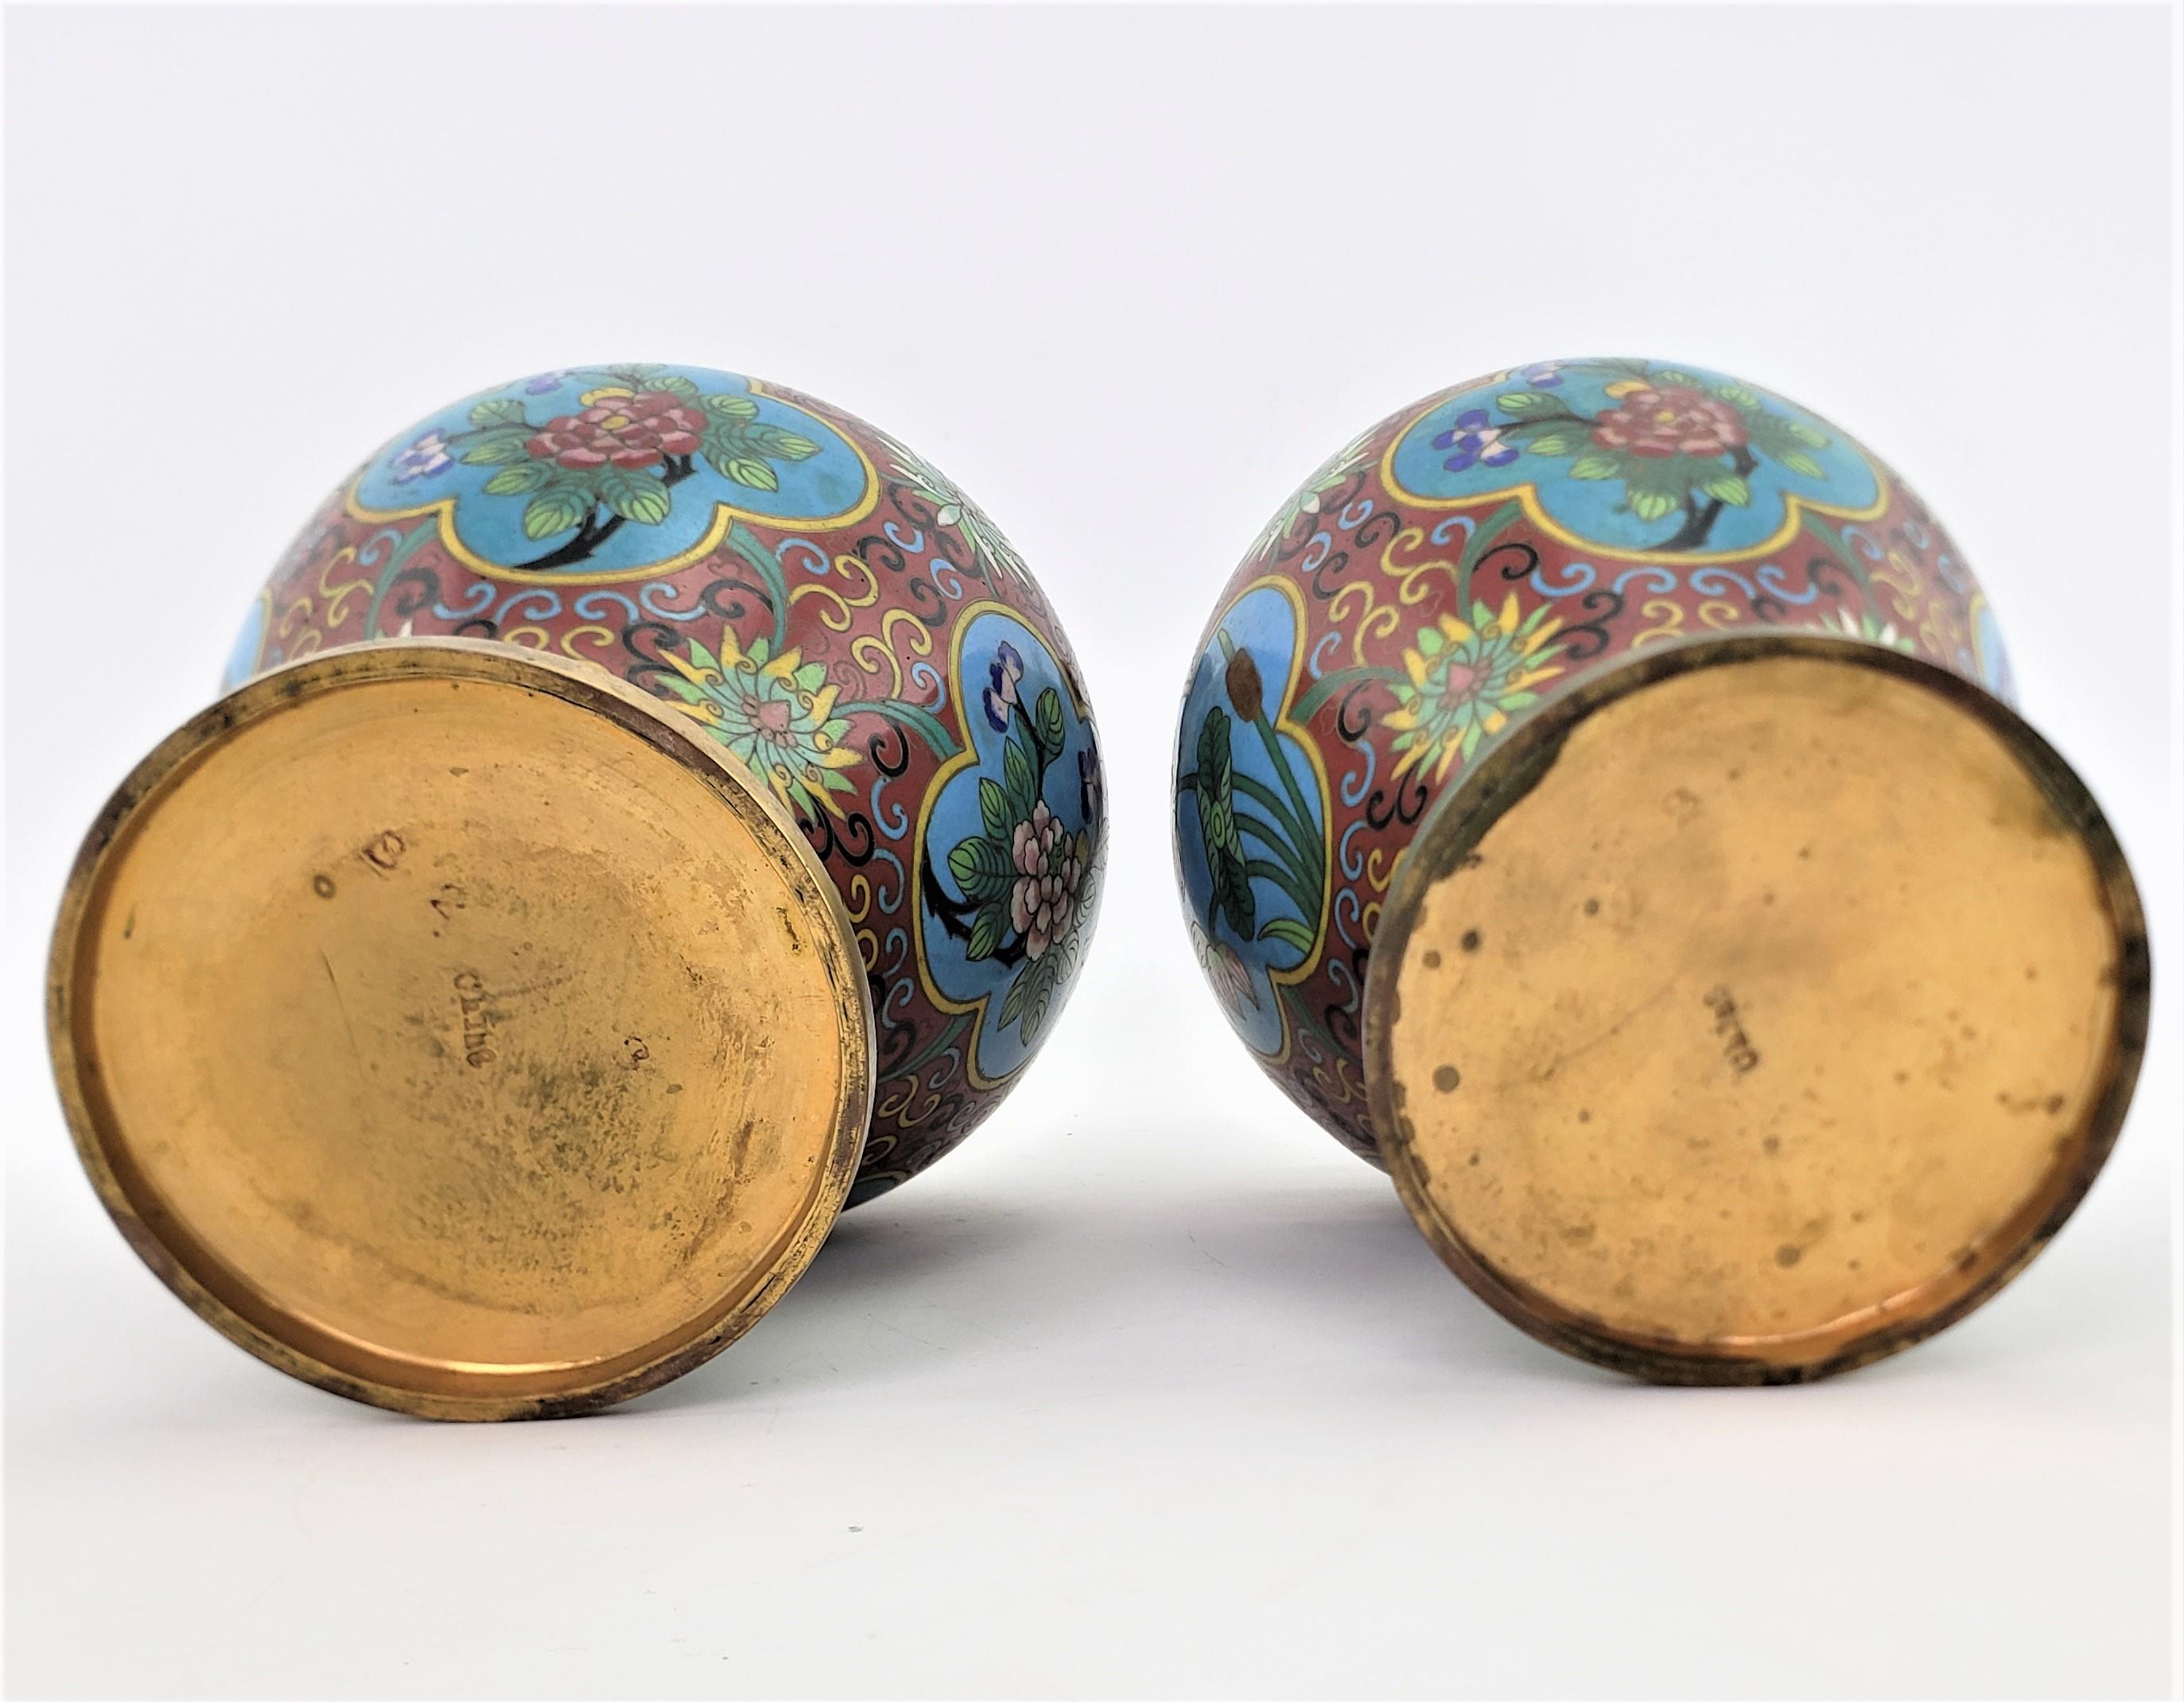 Pair of Early Chinese Republic Era Cloisonne Vases with Stylized Floral Motif For Sale 3